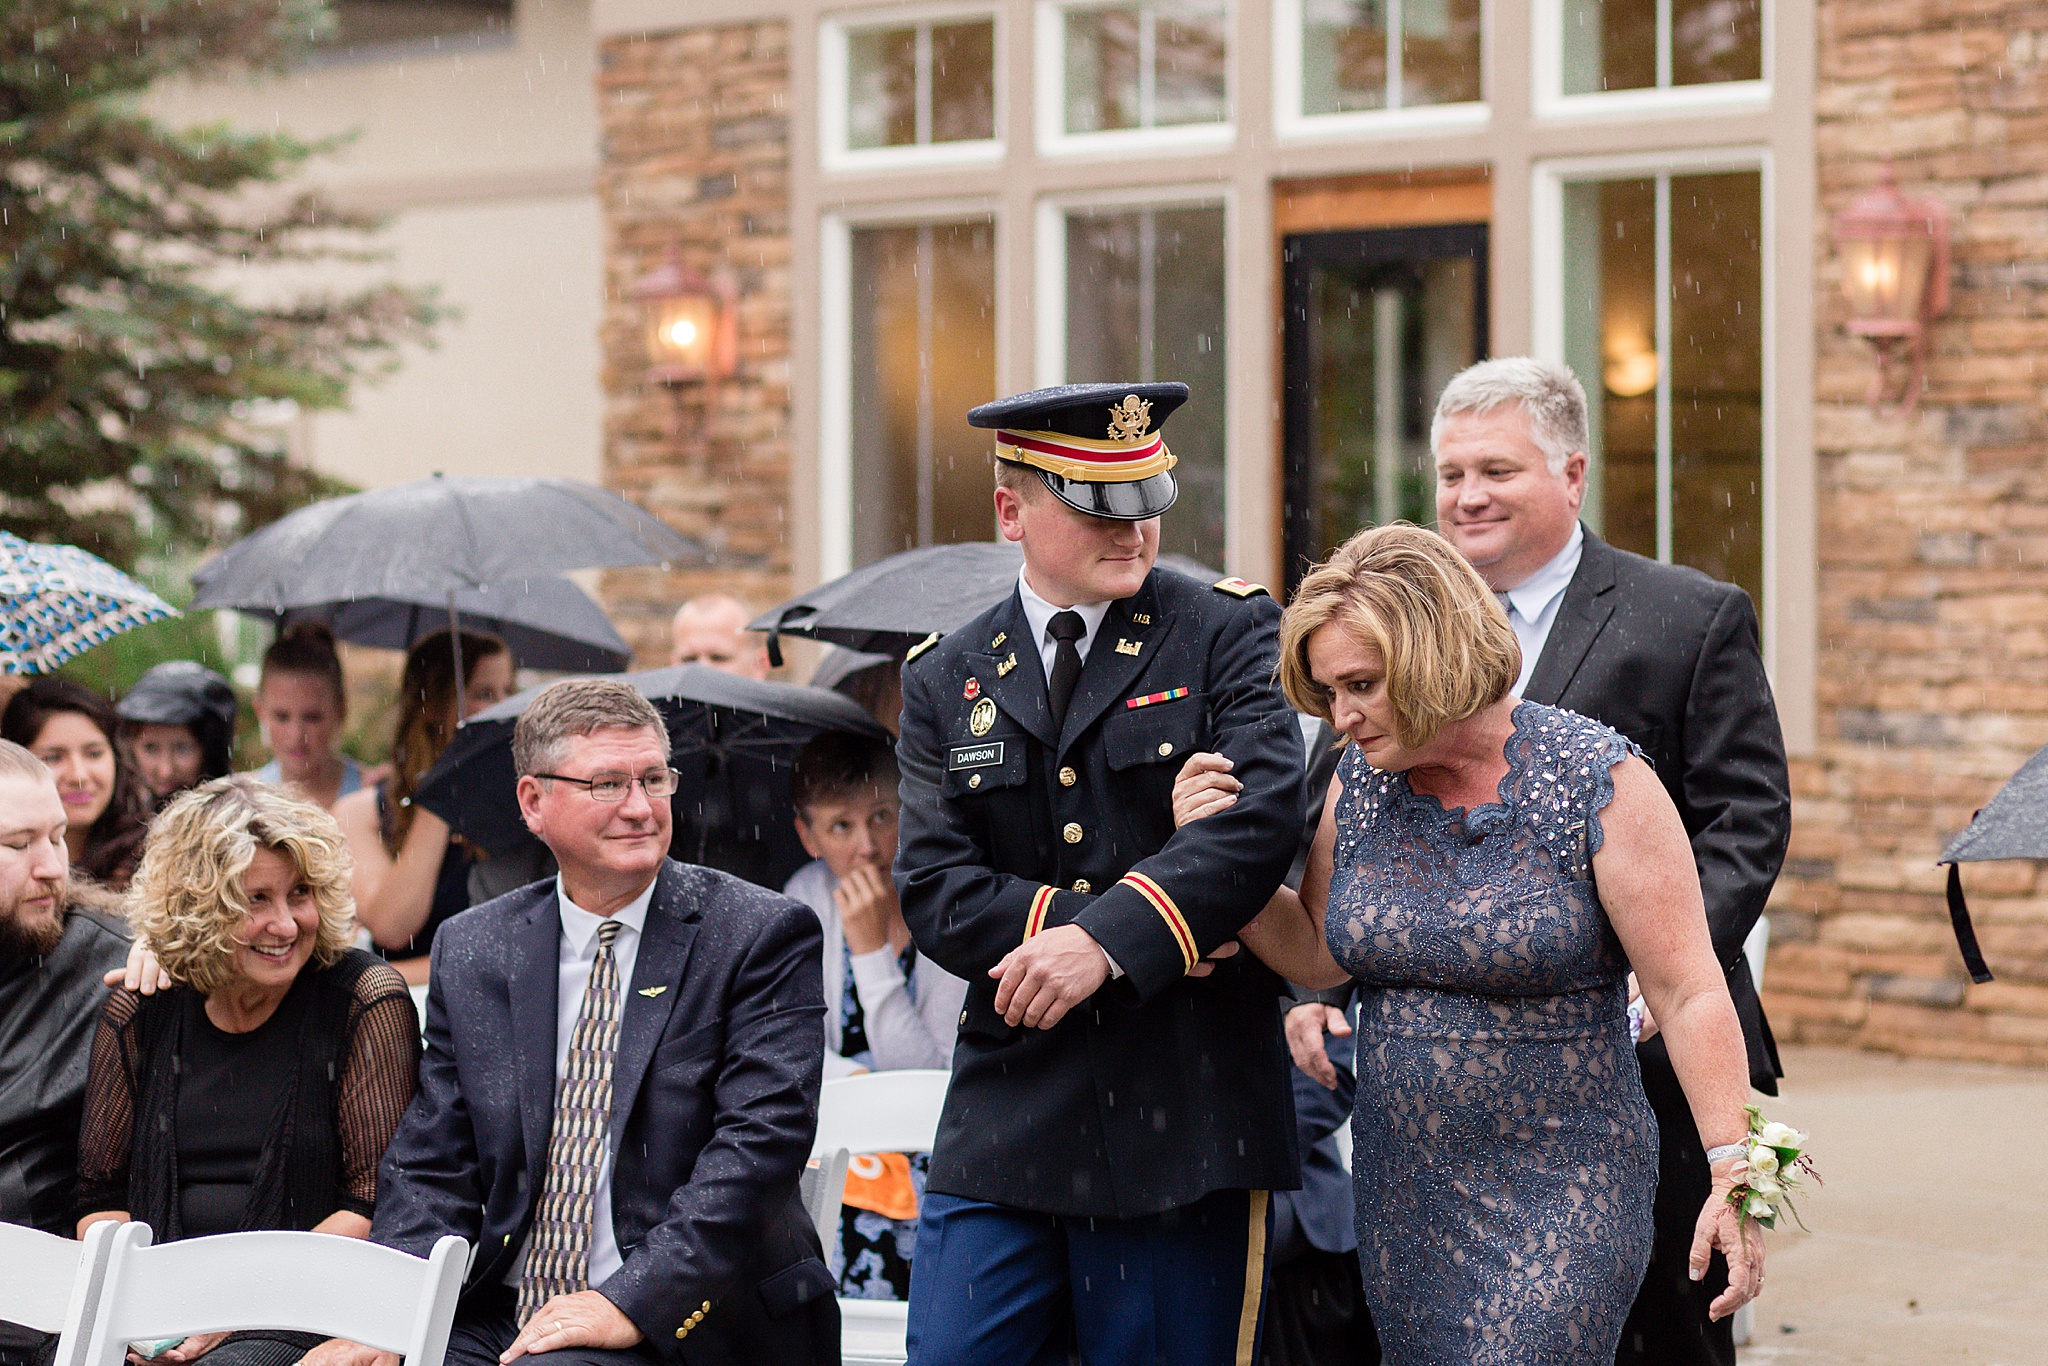 Groom walking down the aisle with his parents at a rainy summer wedding. Tania & Chris' Denver Wedding at the Wedgewood Ken Caryl by Colorado Wedding Photography, Jennifer Garza. Colorado Wedding Photographer, Colorado Wedding Photography, Denver Wedding Photographer, Denver Wedding Photography, US Marine Corp Wedding, US Marine Corp, Military Wedding, US Marines, Wedgewood Weddings, Wedgewood Weddings Ken Caryl, Colorado Wedding, Denver Wedding, Wedding Photographer, Colorado Bride